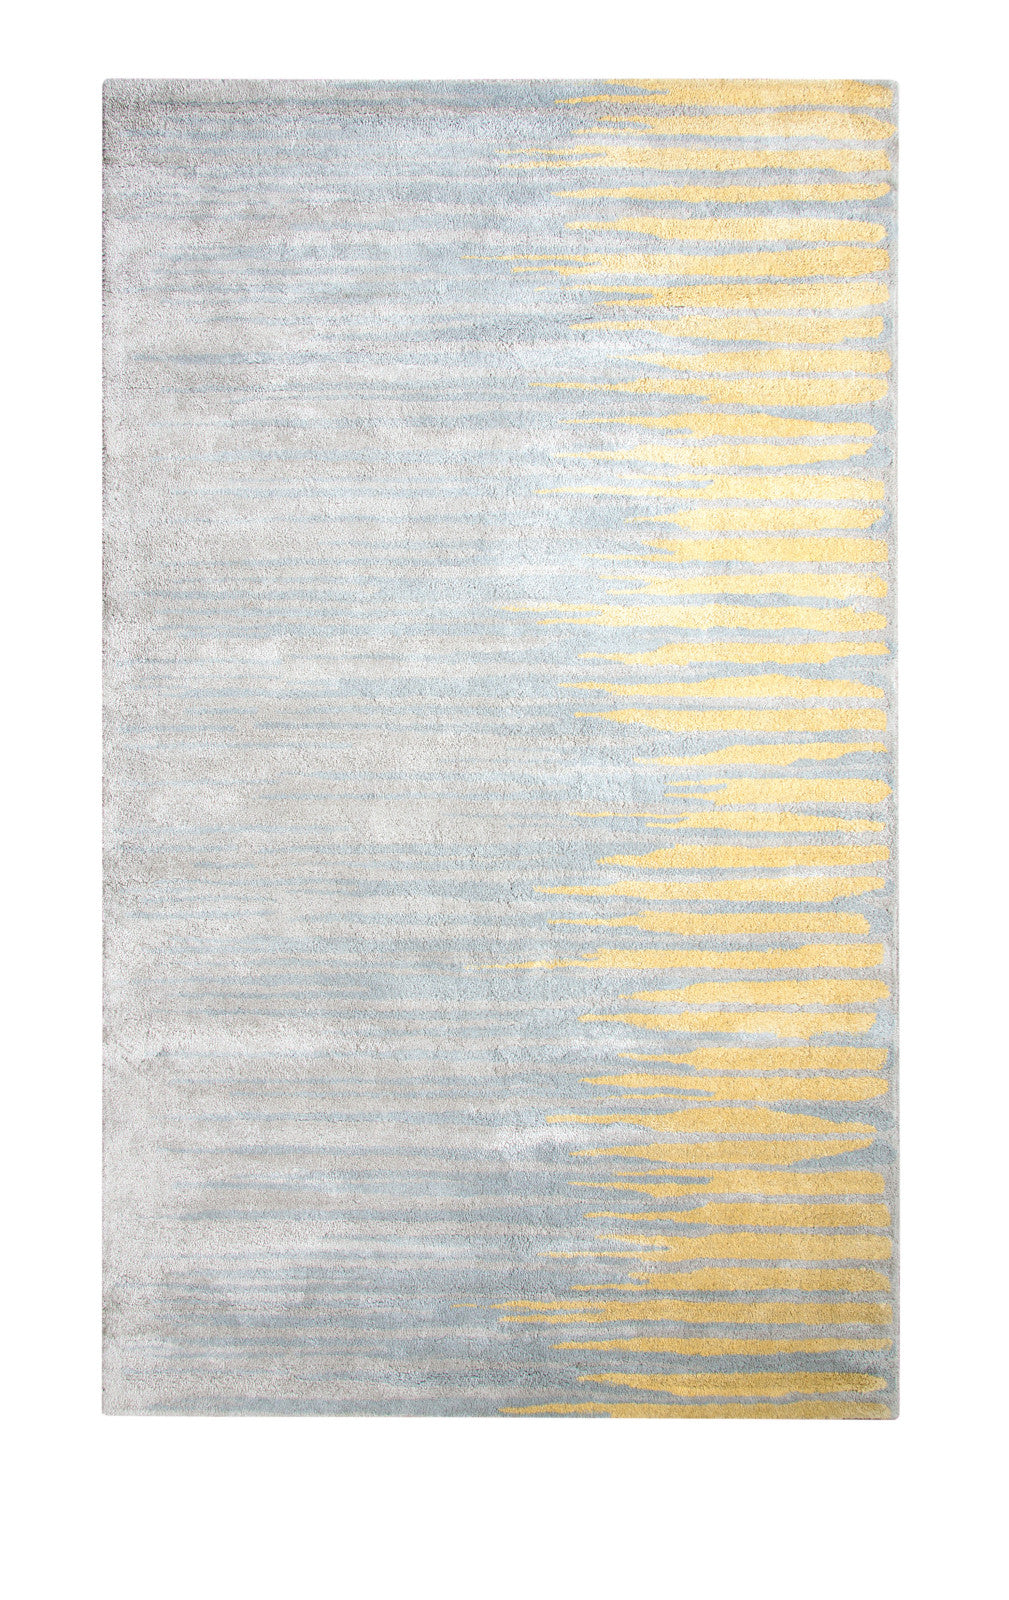 Dynamic Rugs Vogue 881002 Gold Area Rug main image